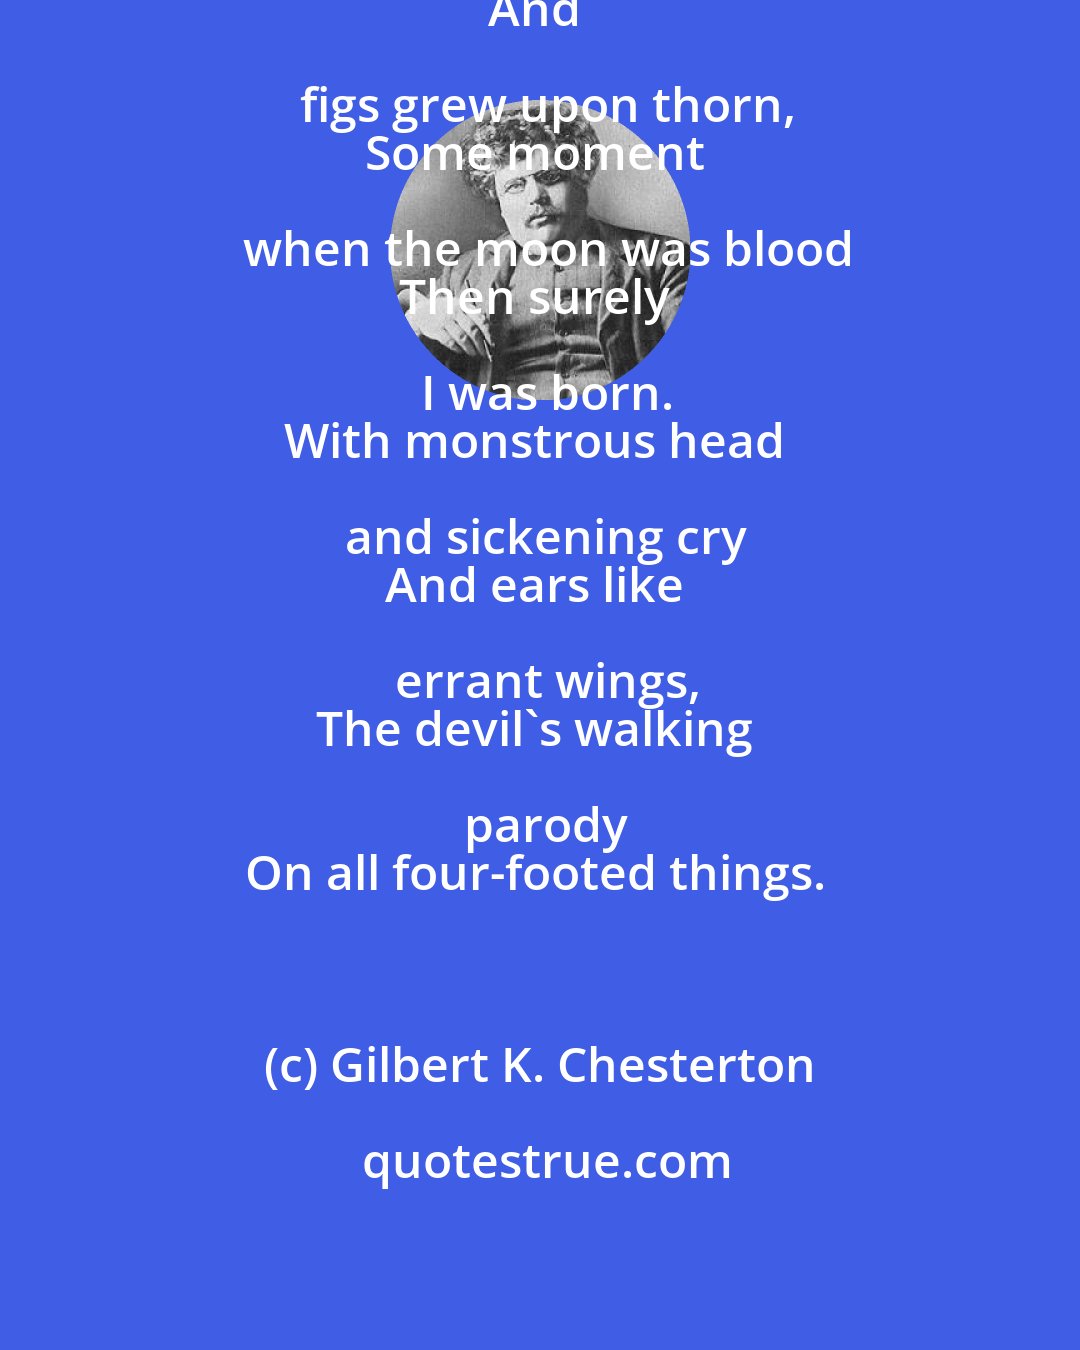 Gilbert K. Chesterton: When fishes flew and forests walked
And figs grew upon thorn,
Some moment when the moon was blood
Then surely I was born.
With monstrous head and sickening cry
And ears like errant wings,
The devil's walking parody
On all four-footed things.